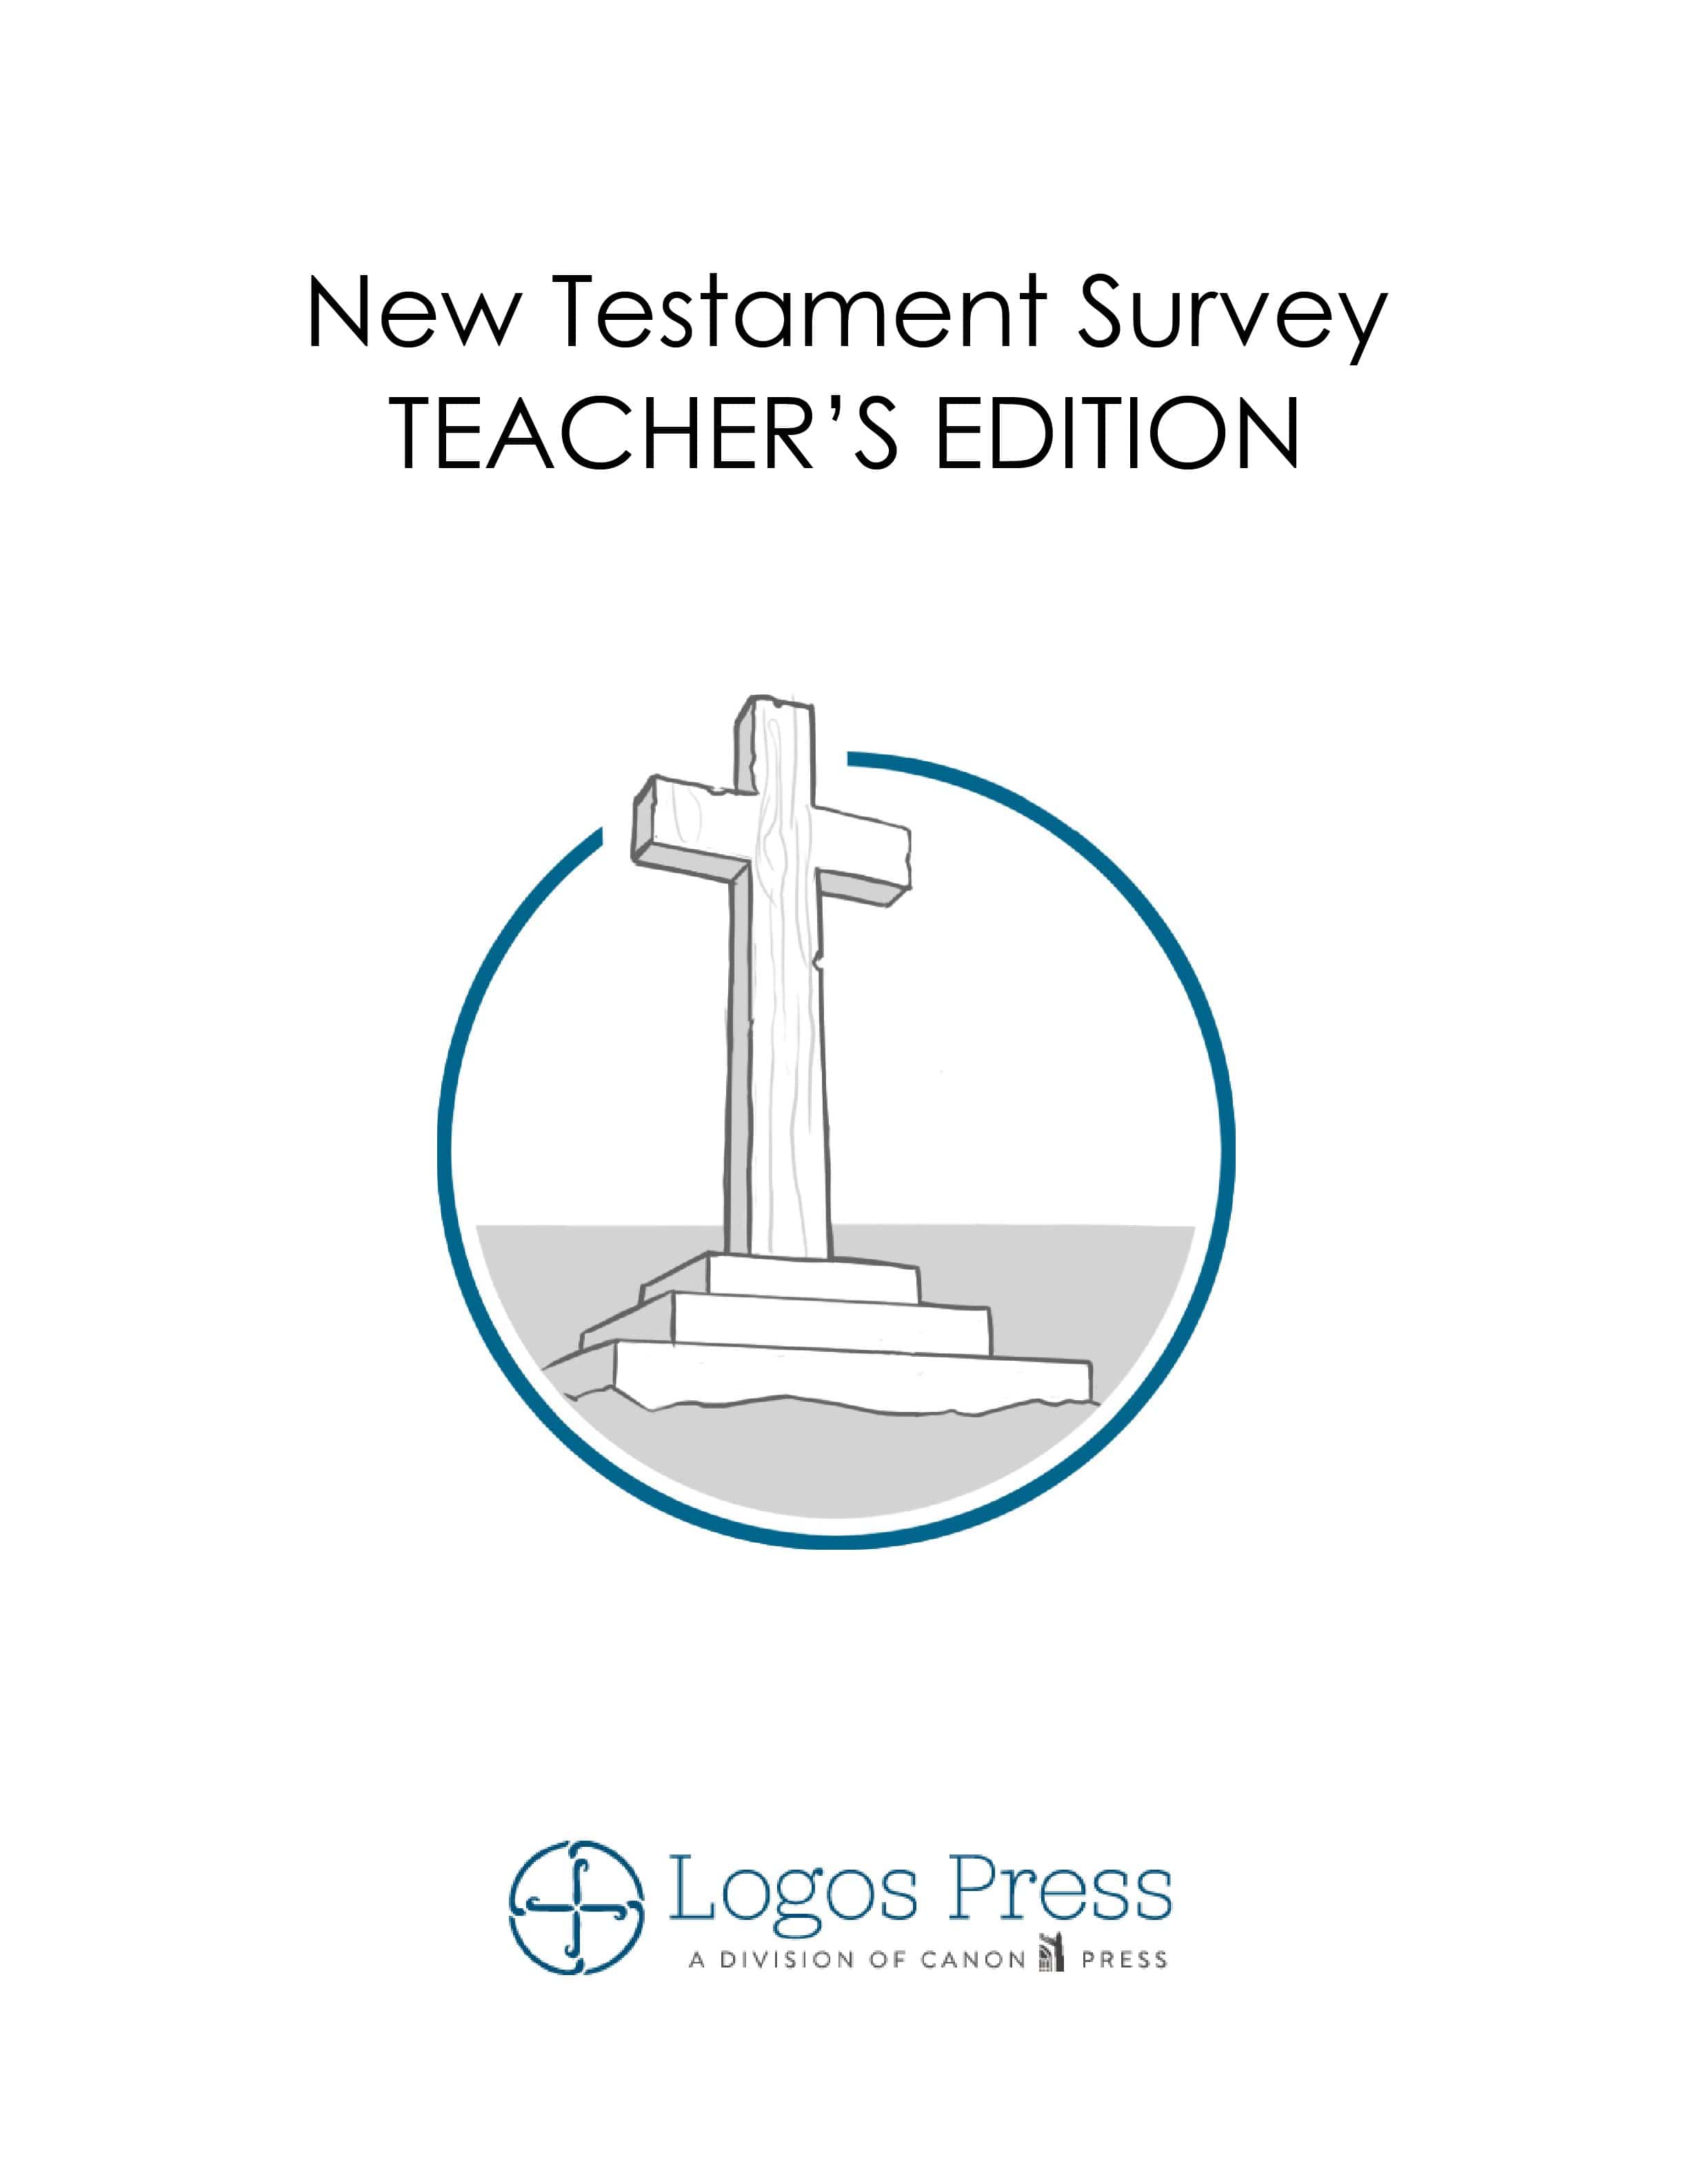 New Testament Survey Package